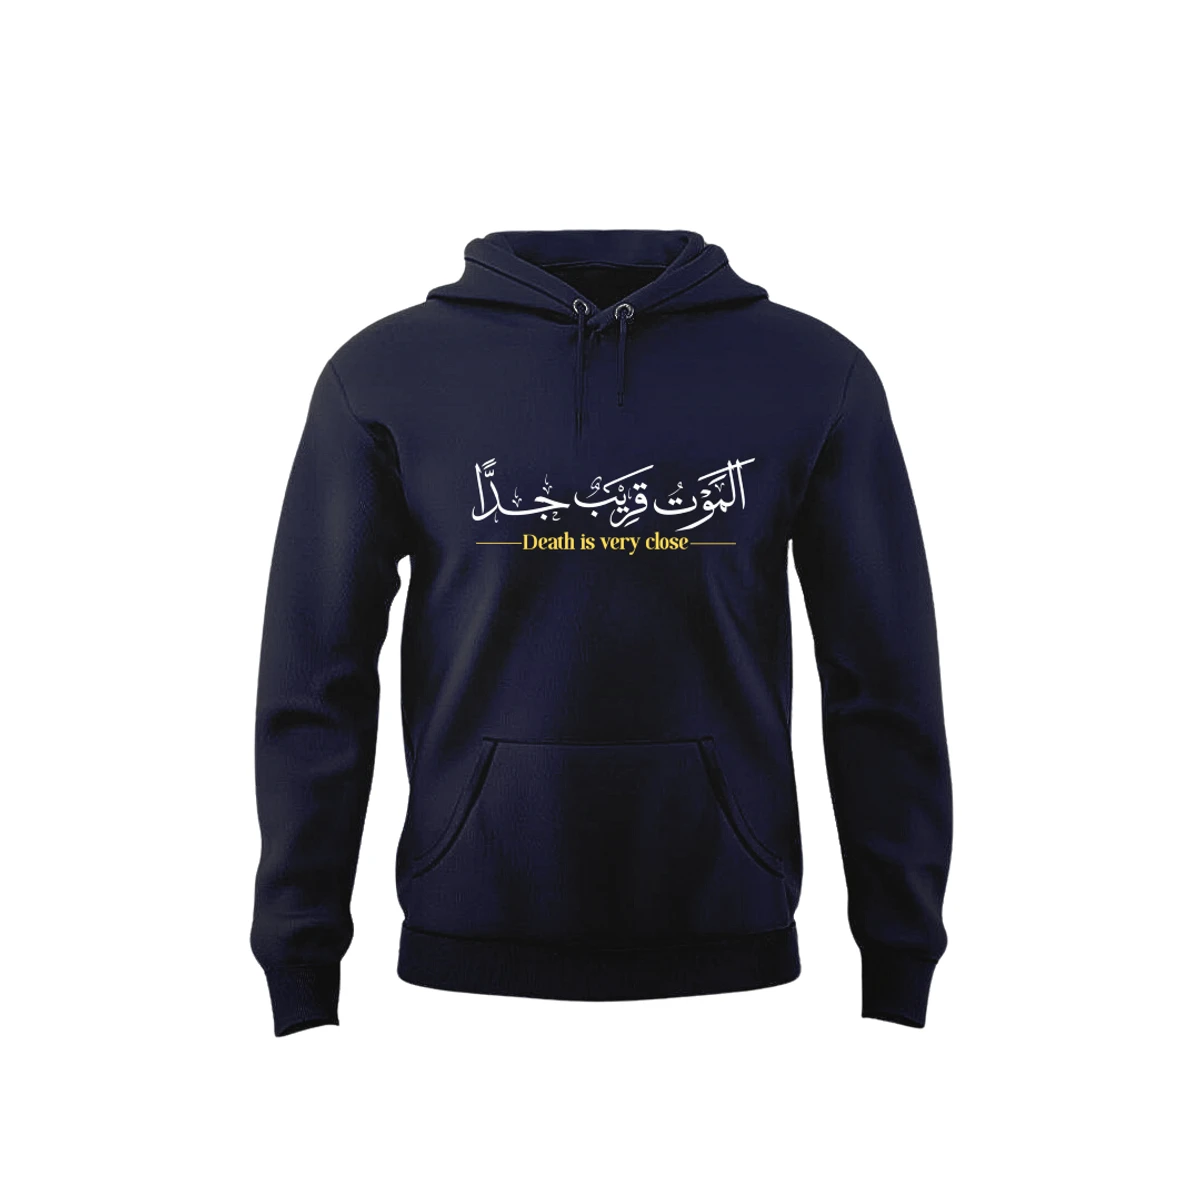 Arabic Typography - Death is very close (Navy Blue)